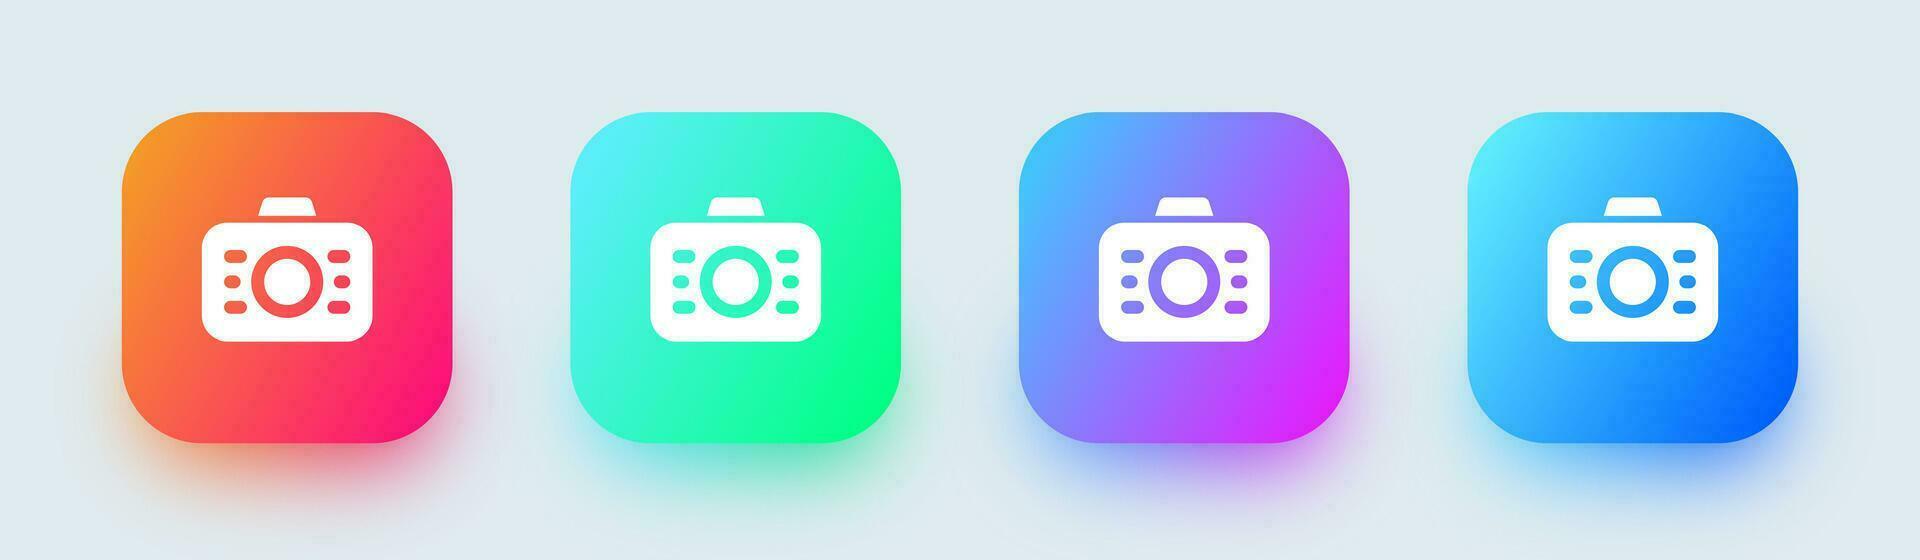 Moment solid icon in square gradient colors. Camera signs vector illustration.